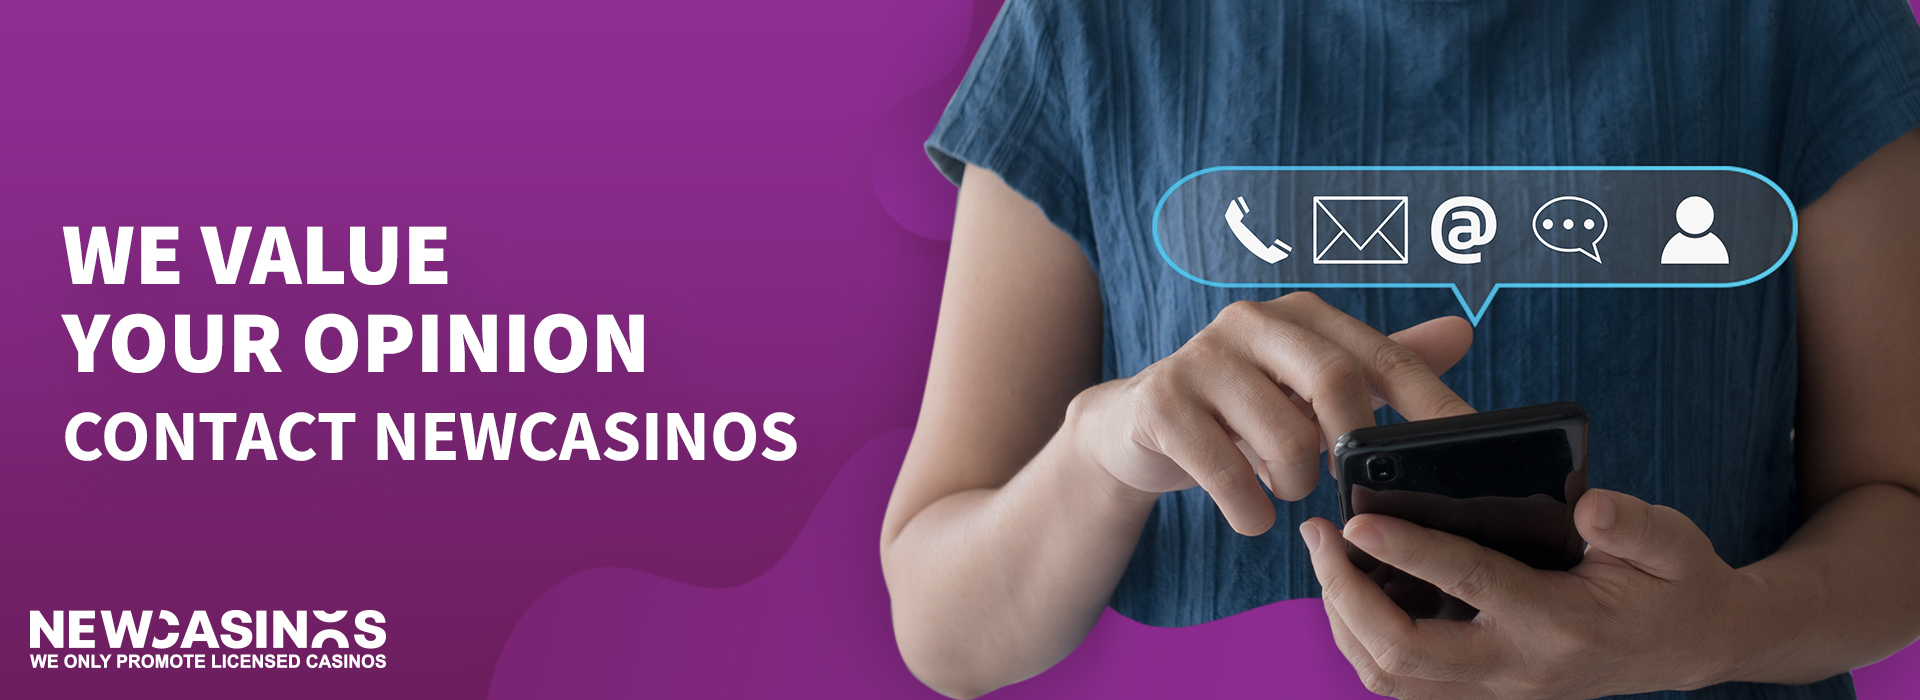 a woman holding a mobile phone with floating icons above of contact methods, with the caption we value your opinion, contact newcasinos.